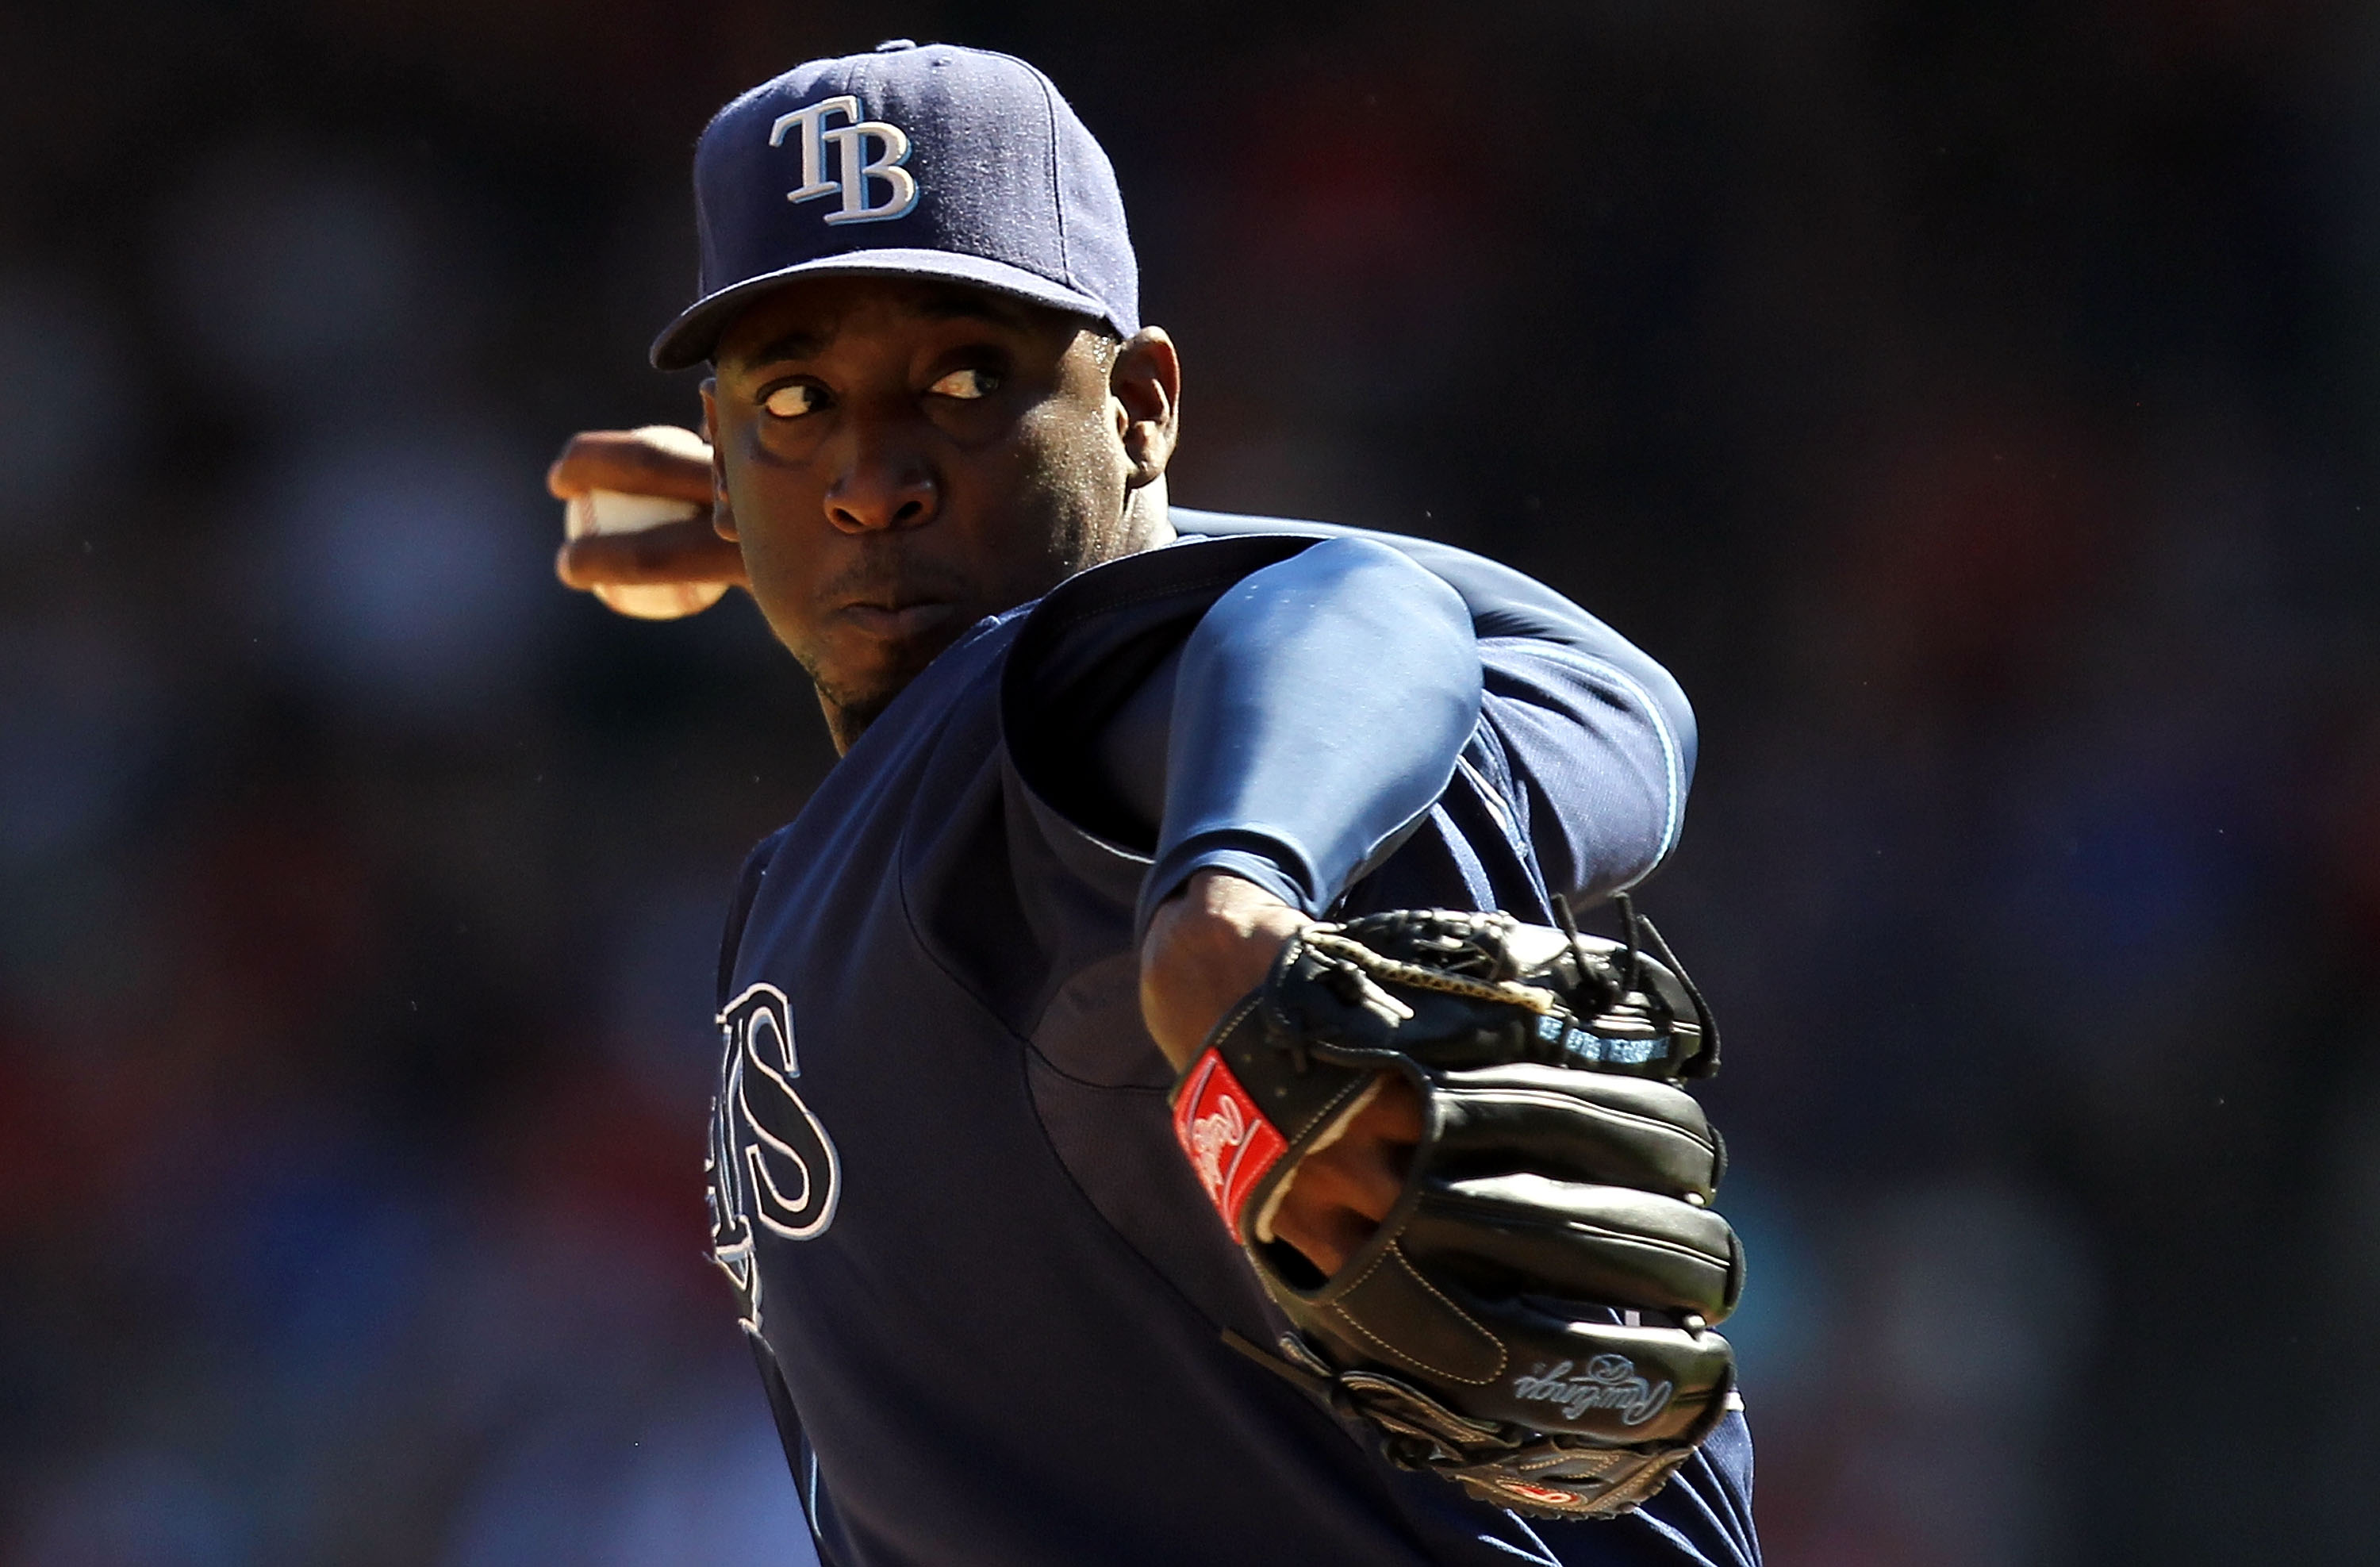 ARLINGTON, TX - OCTOBER 10:  Pitcher Rafael Soriano #29 of the Tampa Bay Rays throws against the Texas Rangers during game 4 of the ALDS at Rangers Ballpark in Arlington on October 10, 2010 in Arlington, Texas.  (Photo by Ronald Martinez/Getty Images)